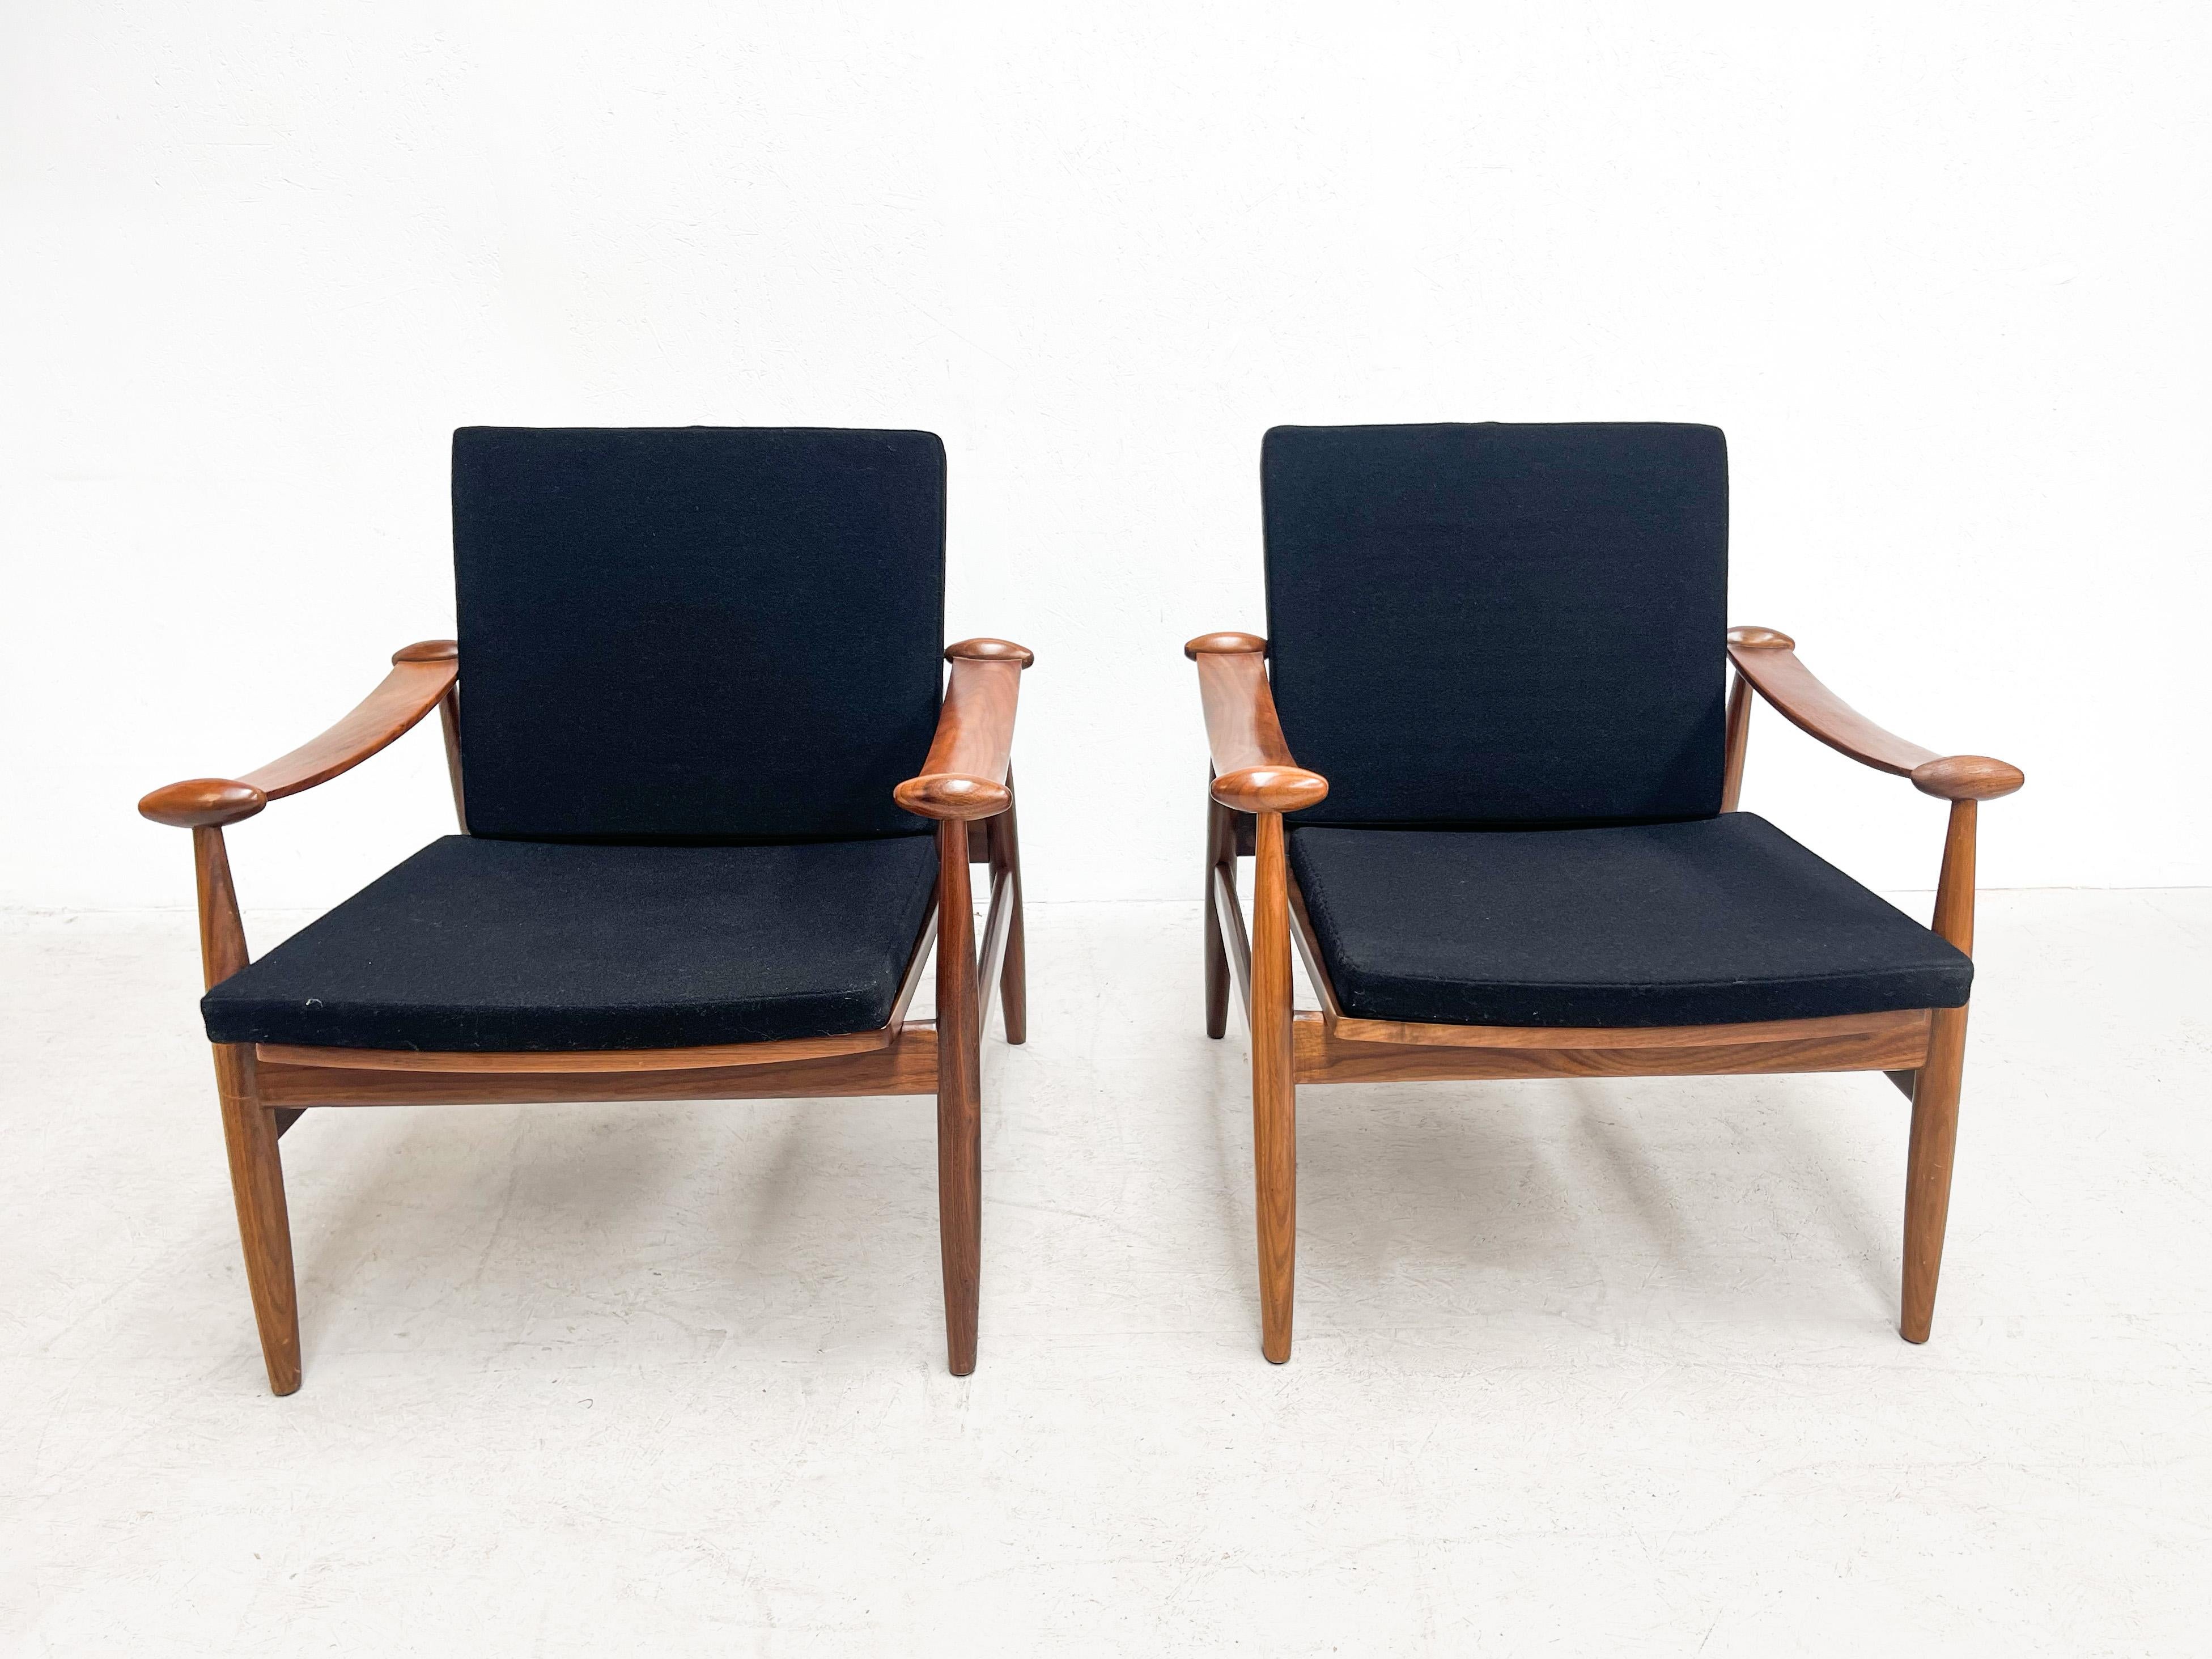 Set of 2 FD133 Finn Juhl easy chairs
A magnificent set of 2 Danish easy chairs designed by 1 of Denmark's best and most famous desginers Finn Juhl. These chairs are model FD133 or 